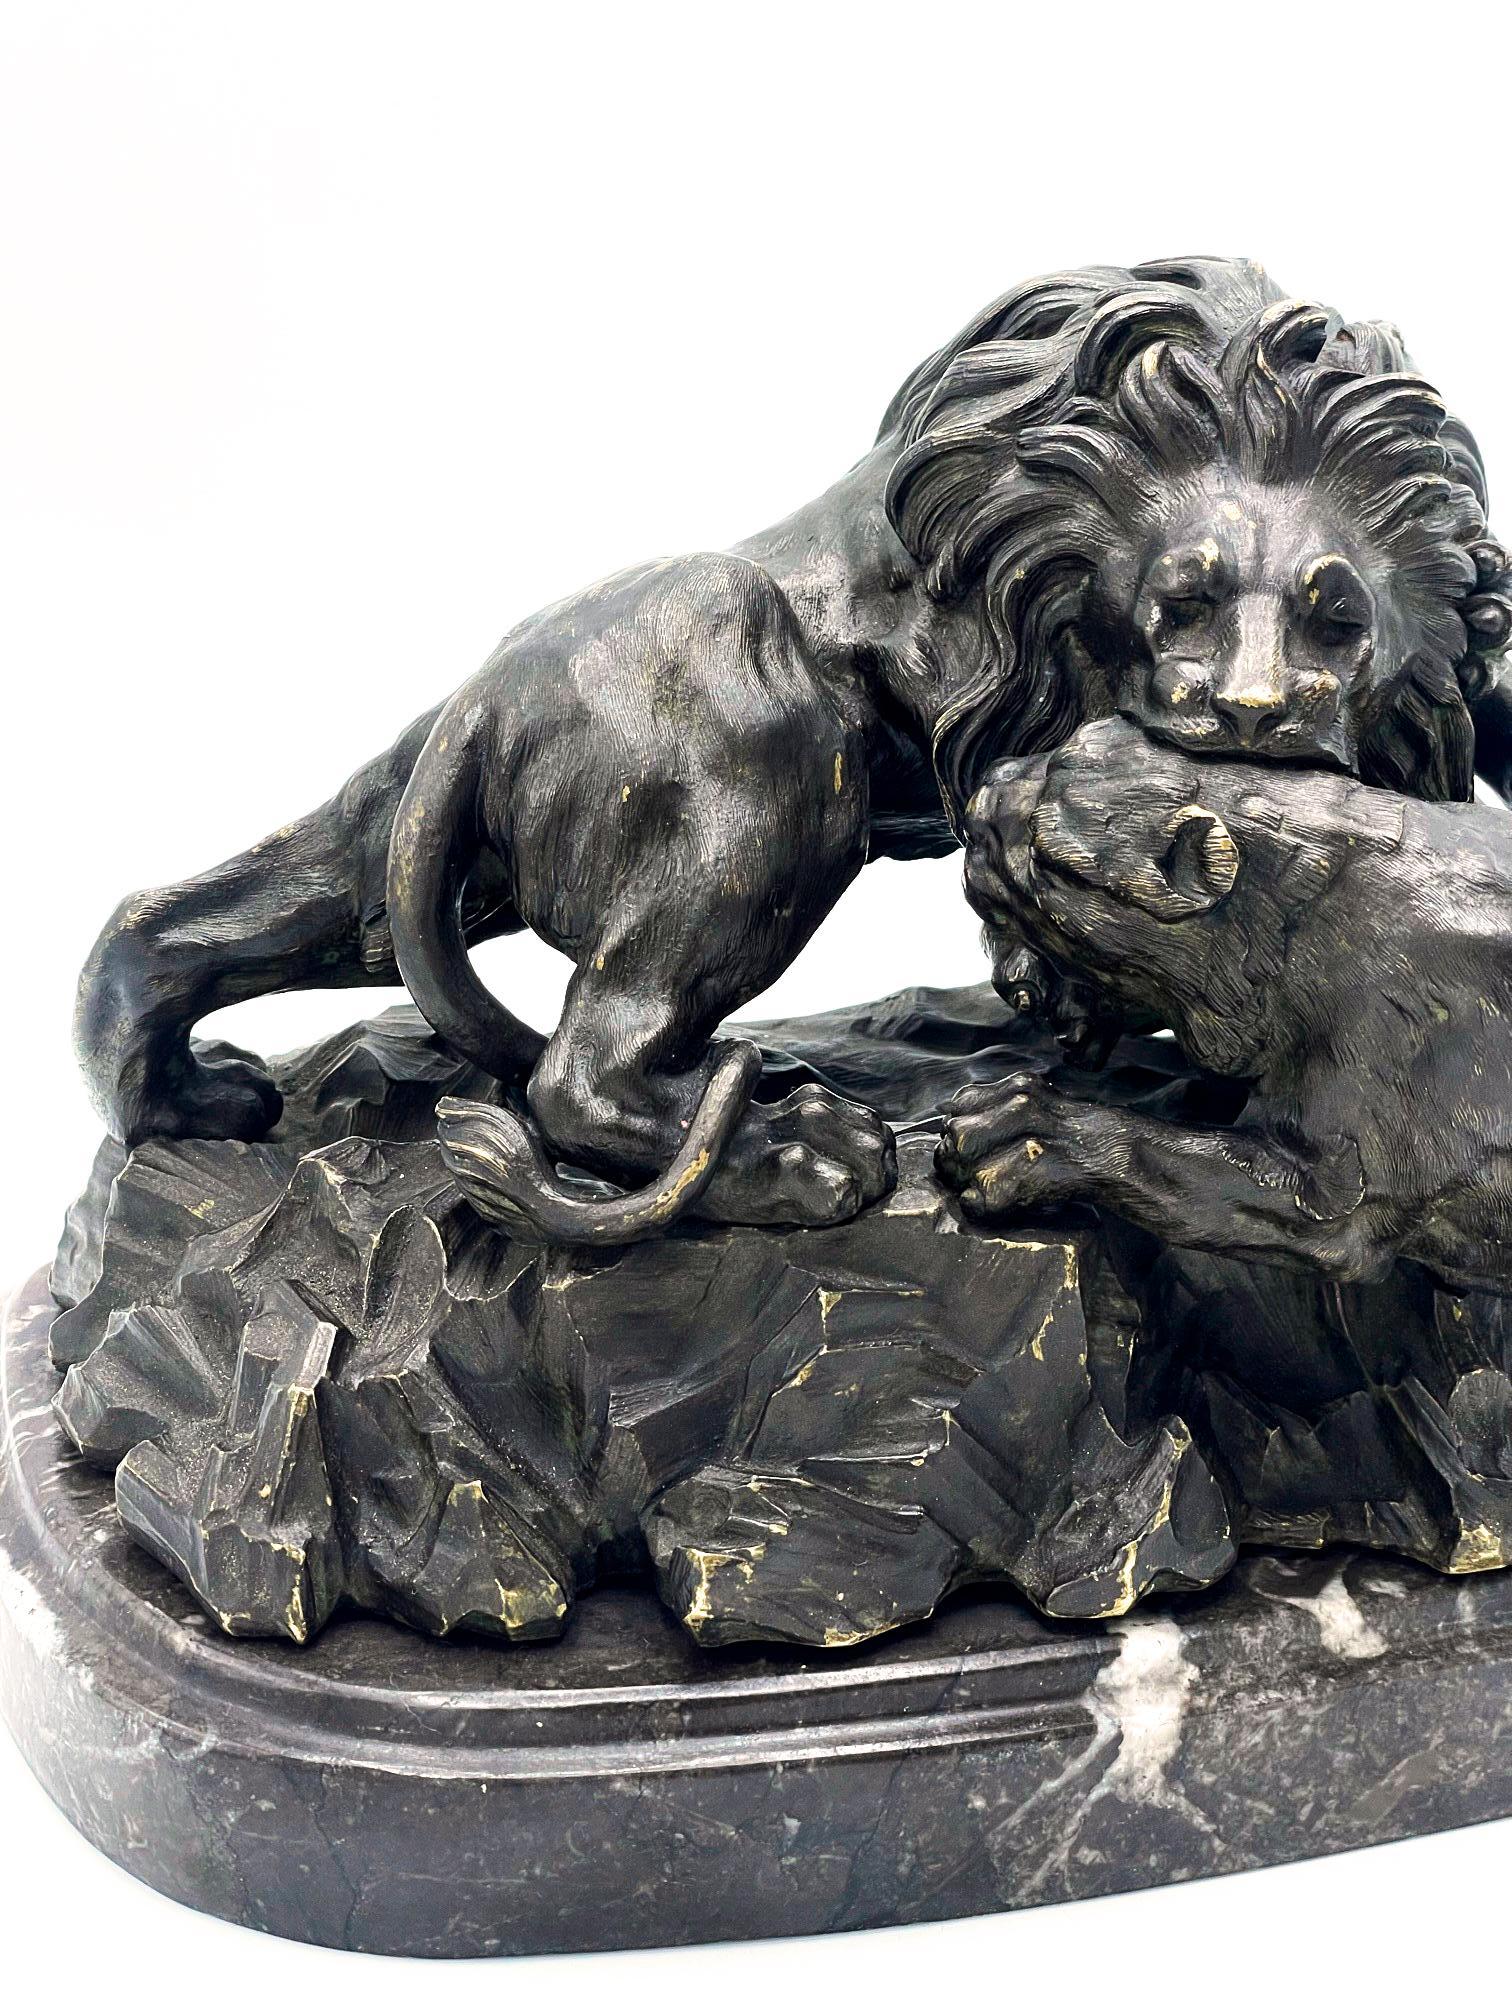 Antoine-Louis Barye (Paris, 1795-1875). Lion crushing a Leopard. 
Bronze with a brown patina signed Barye on the left hand side of the base. The bronze sculpture is sitting on a black marble base.

This spectacular bronze representing the 